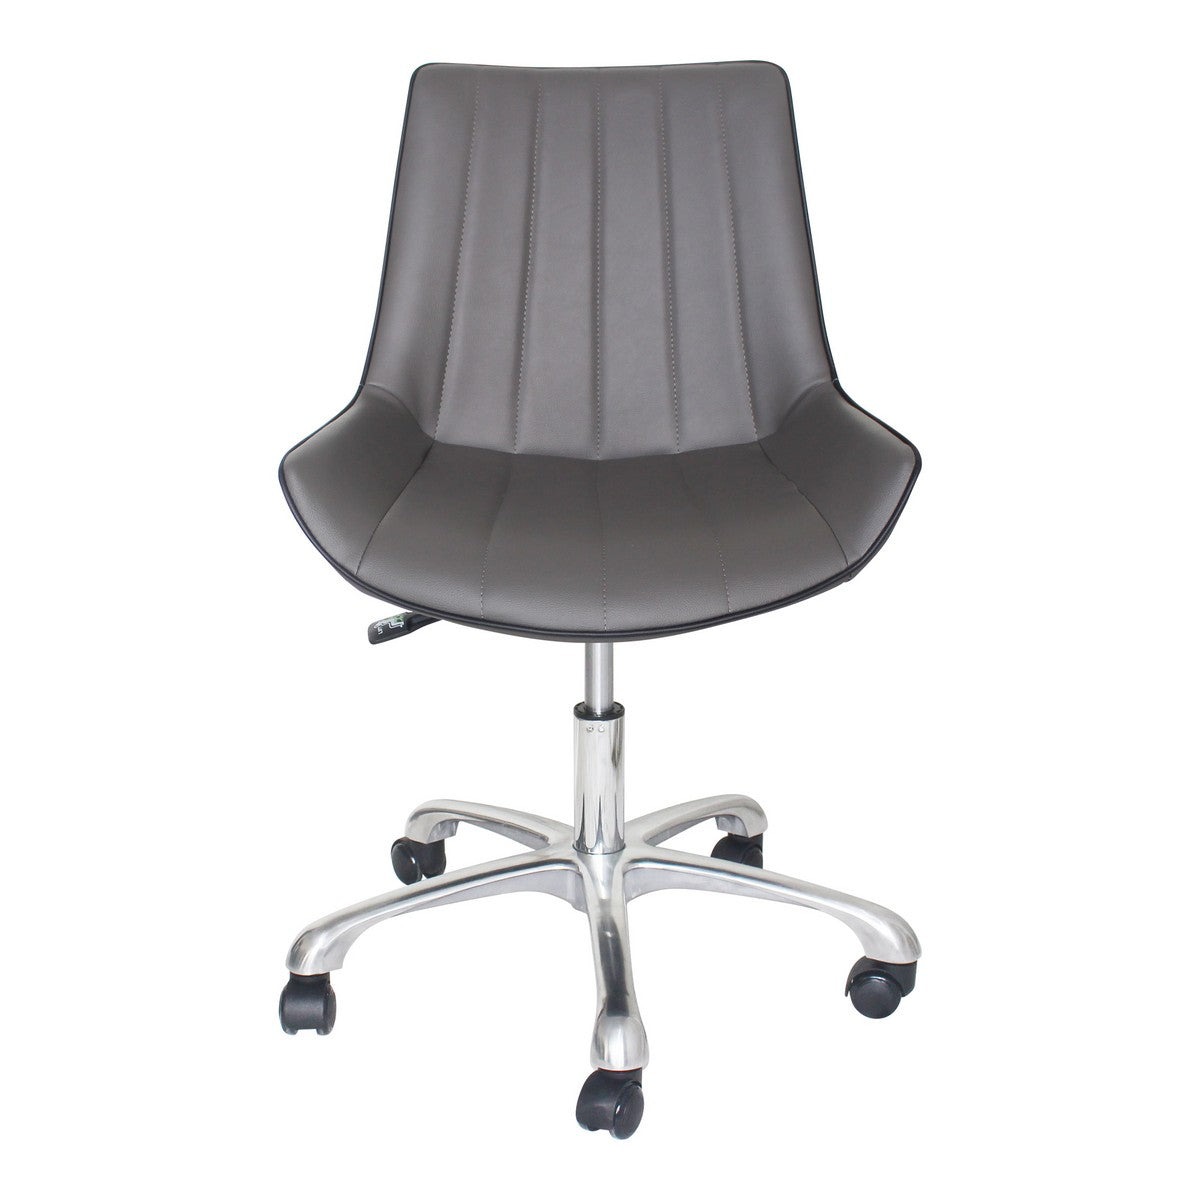 Moe's Home Collection Mack Swivel office Chair Grey - UU-1010-41 - Moe's Home Collection - Office Chairs - Minimal And Modern - 1